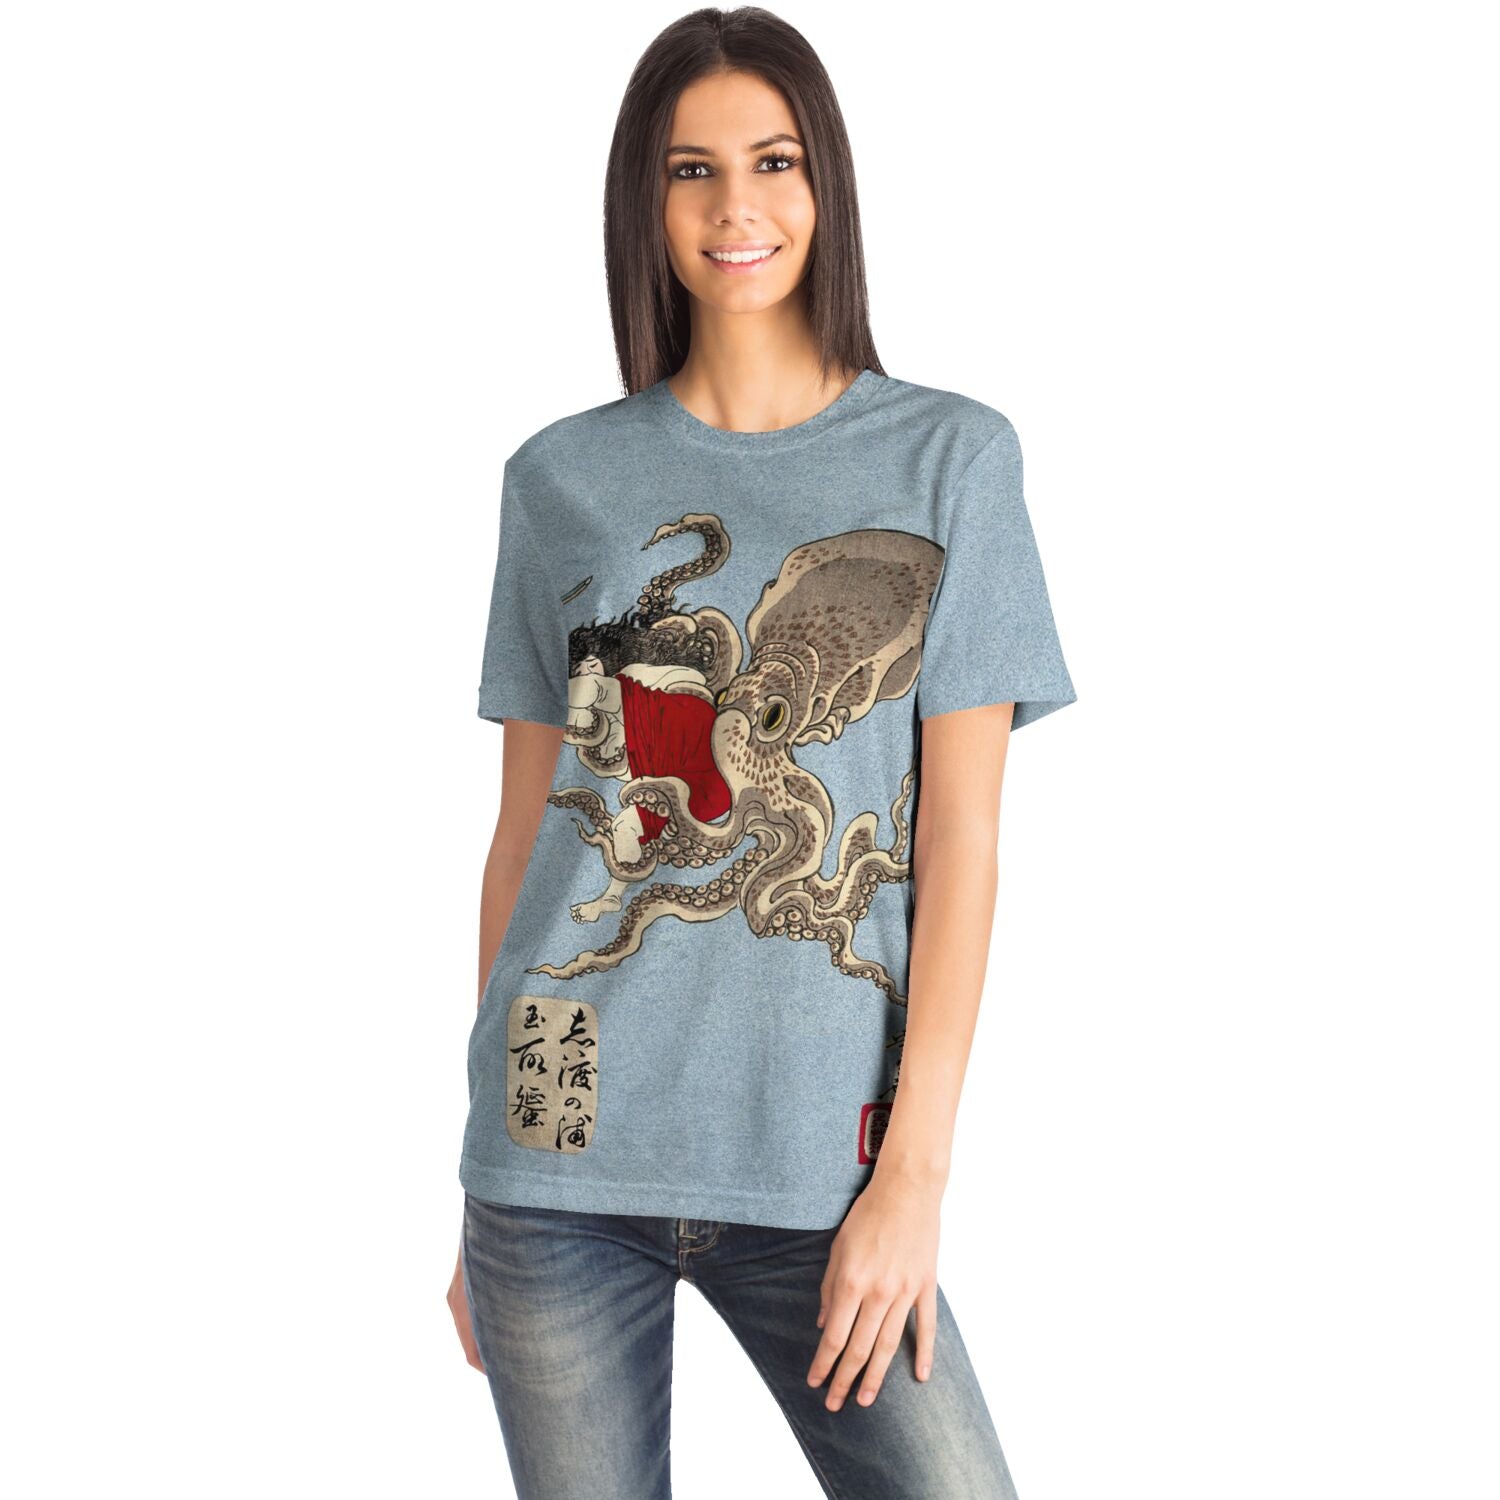 T-shirt Woman Battling an Octopus (Yoshitoshi) | "A Collection of Desires" Squid Graphic Art T-Shirt